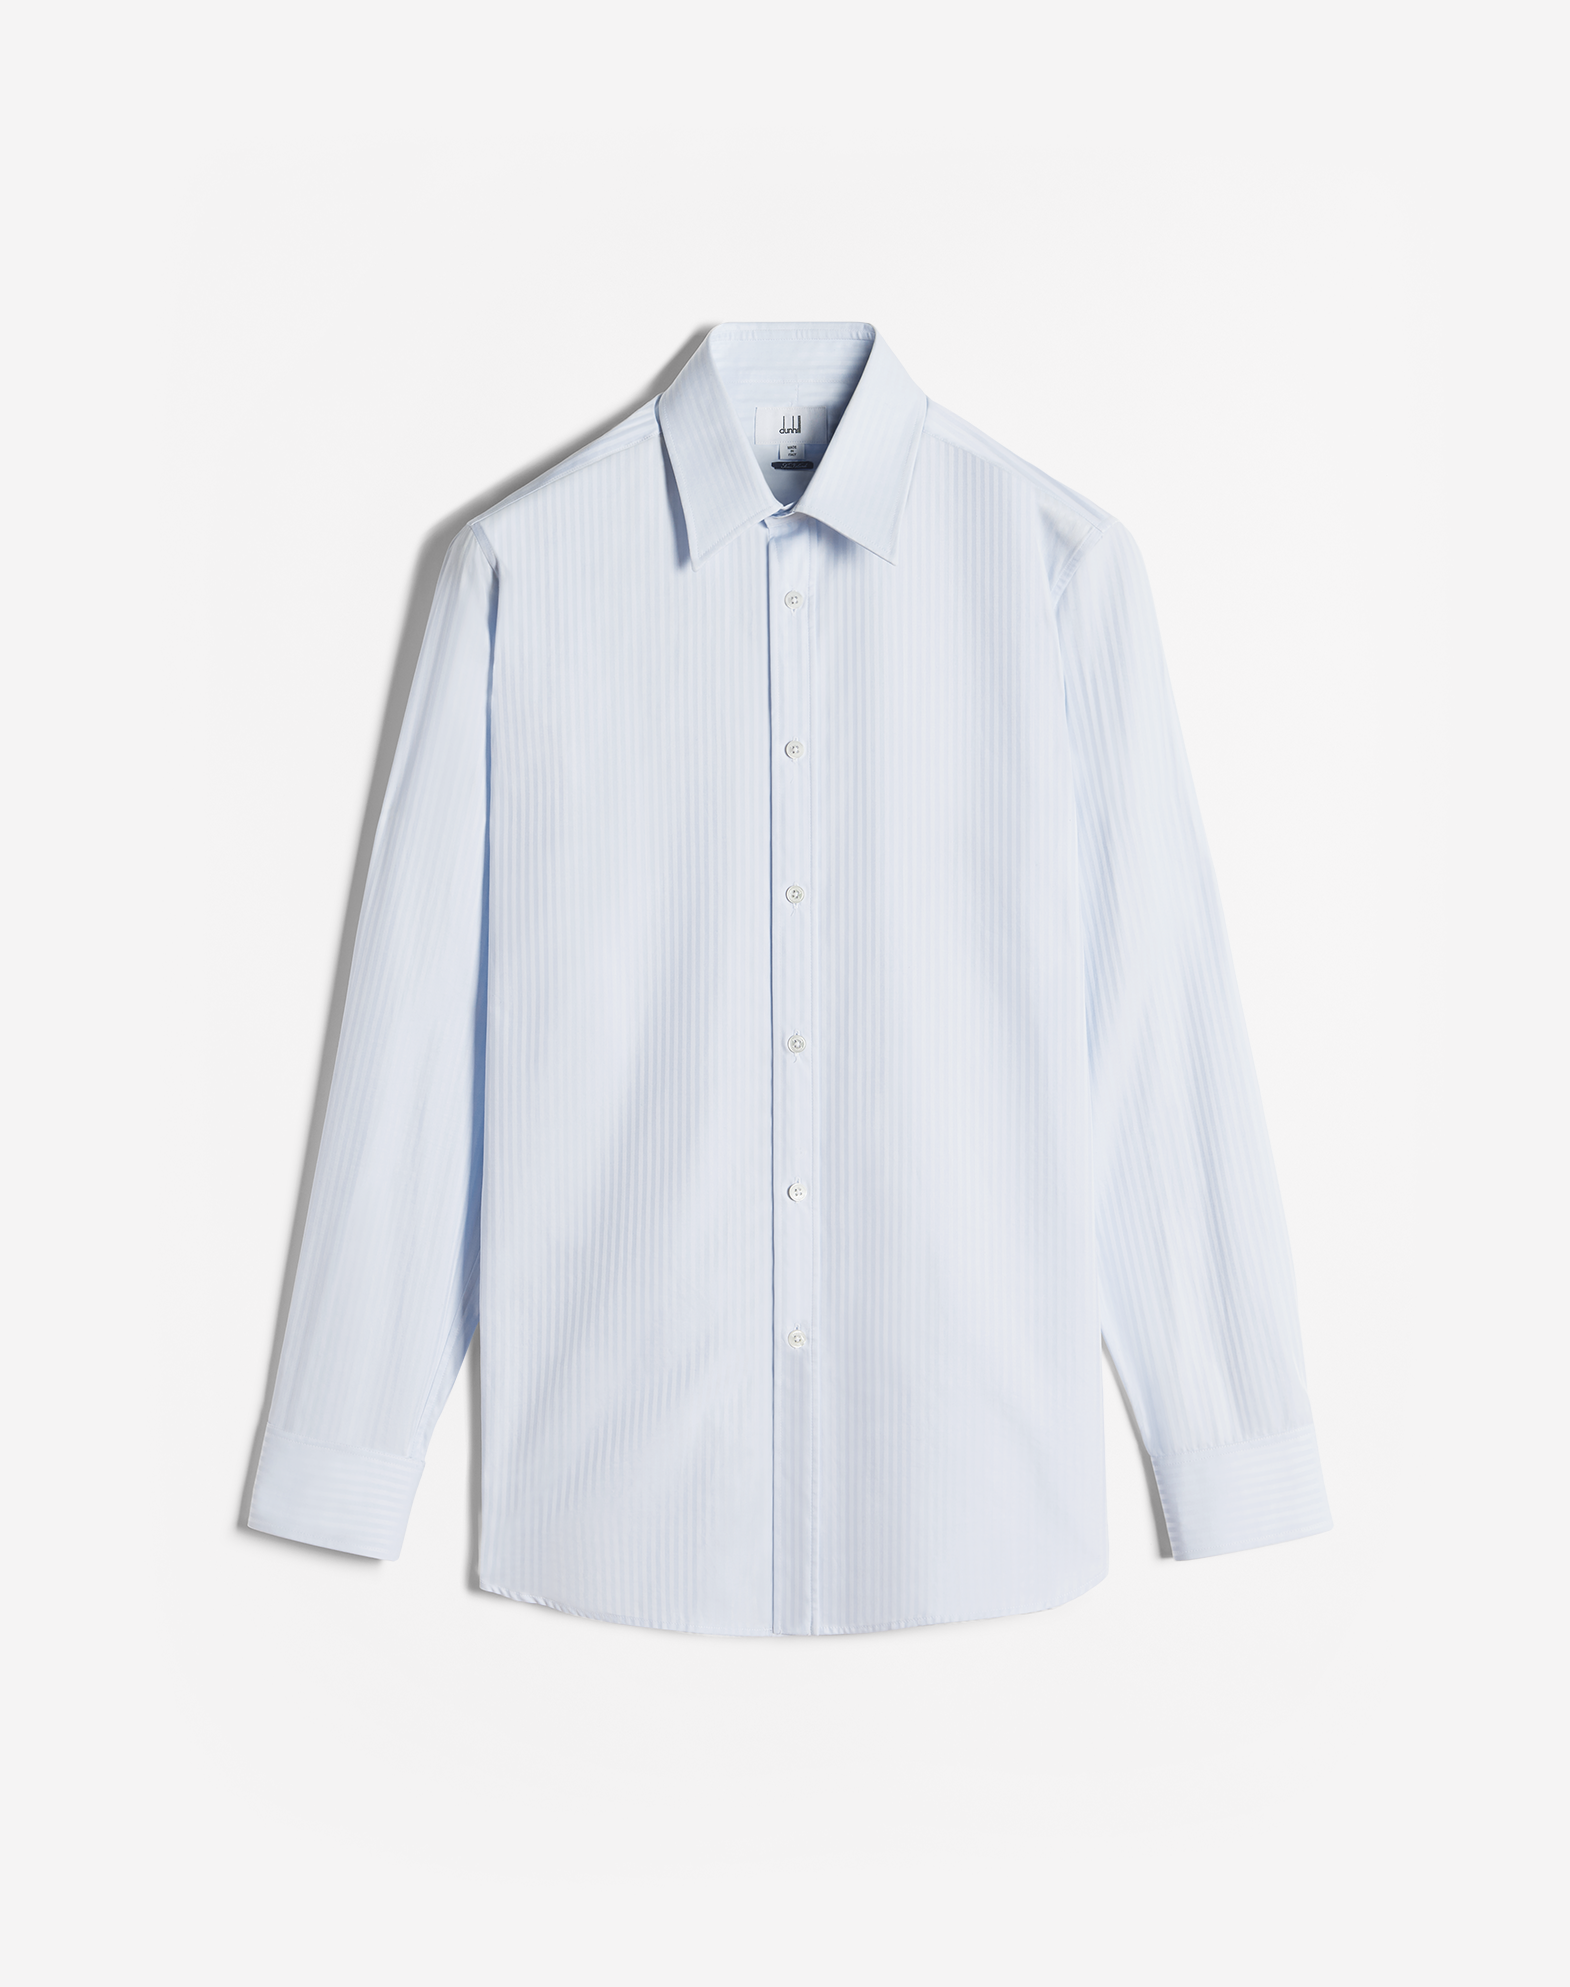 Dunhill Luxury Men's Formal Shirts